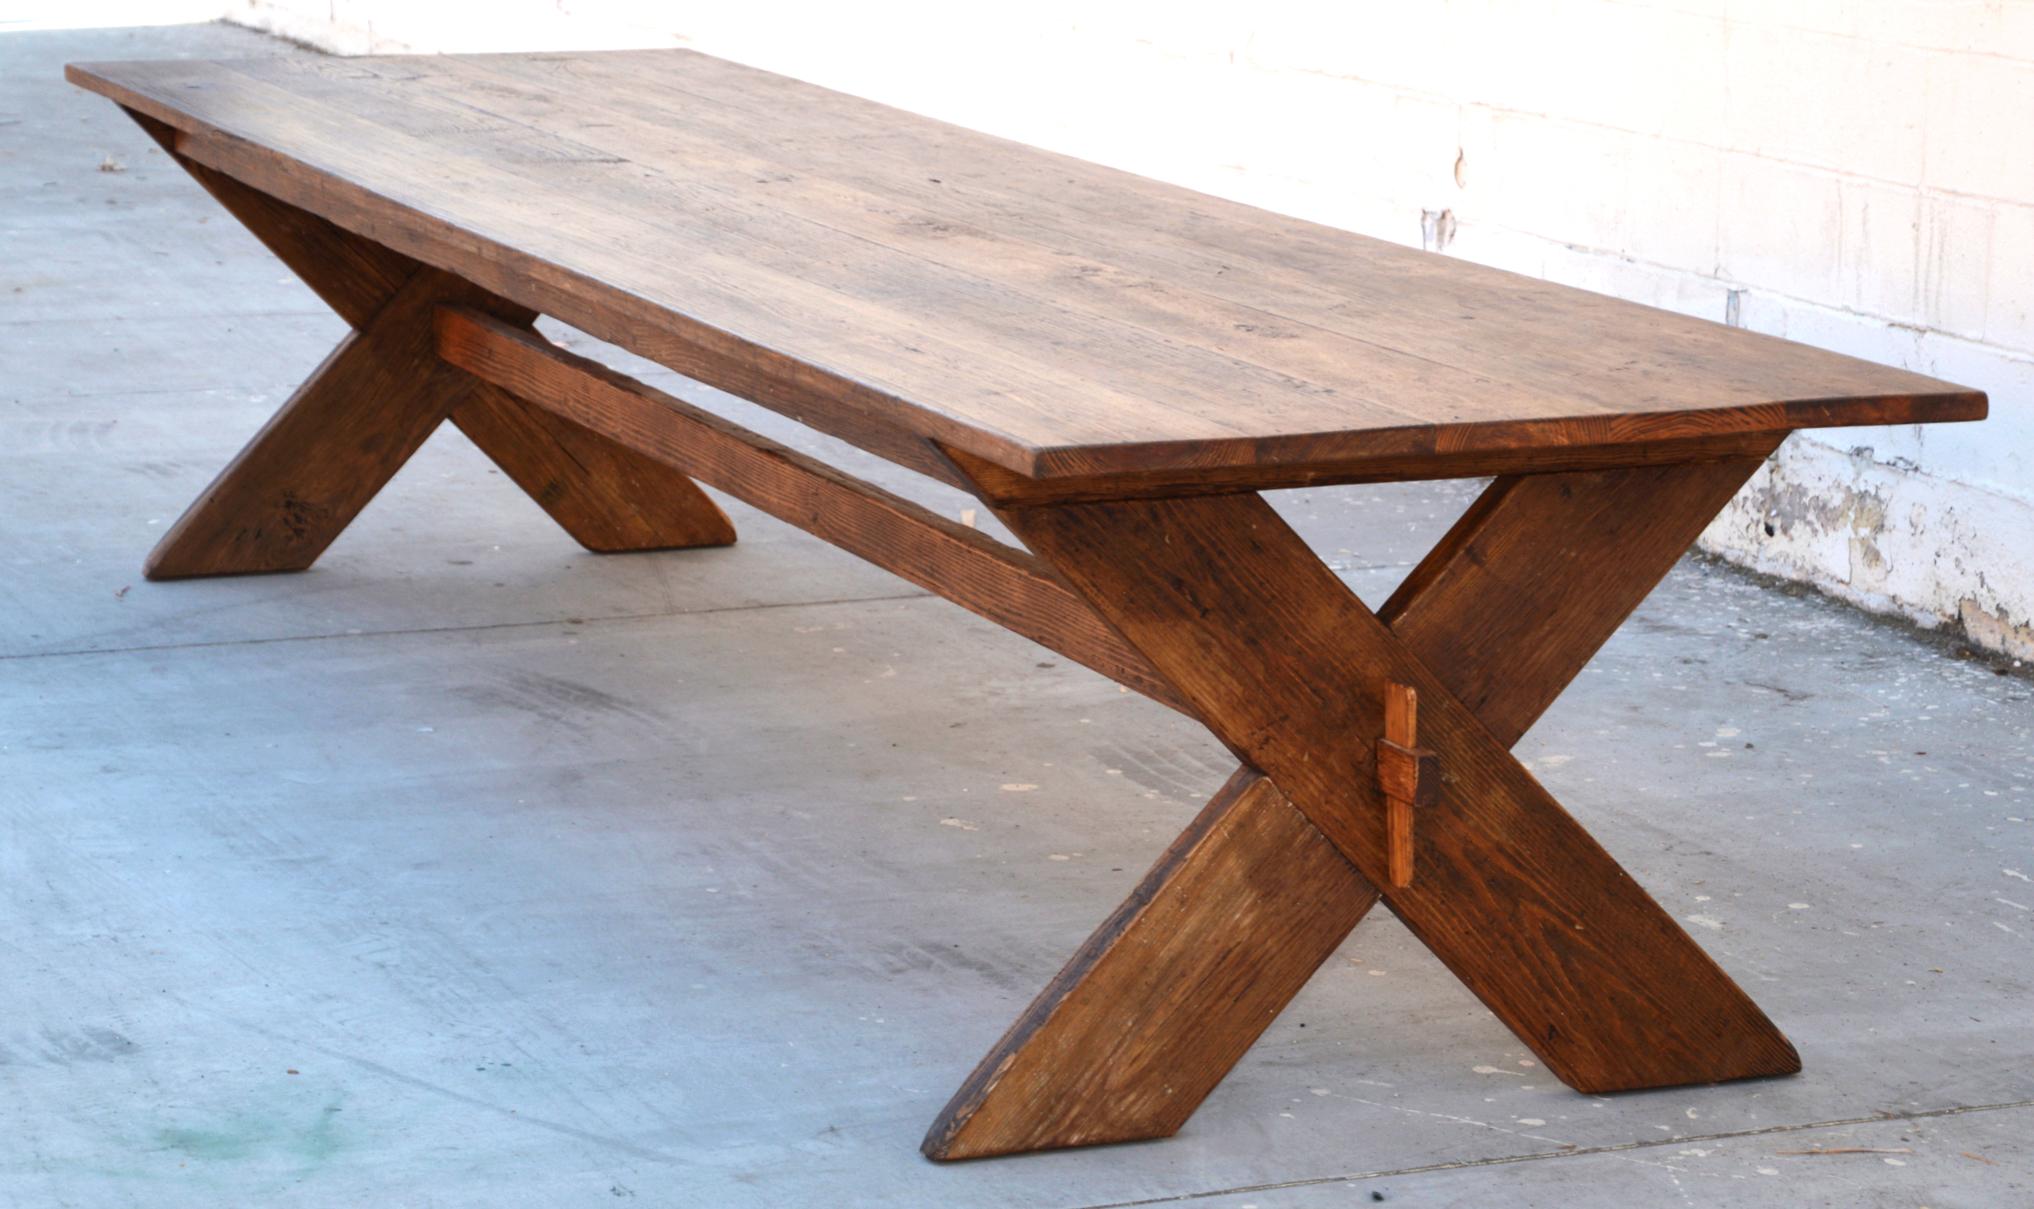 This X-base trestle table is made by hand, in our own workshop, from hand-selected antique, reclaimed heart pine. It is fully collapsible and assembles in 2 minutes without the need for tools, enabling it to be shipped flat. This price applies to